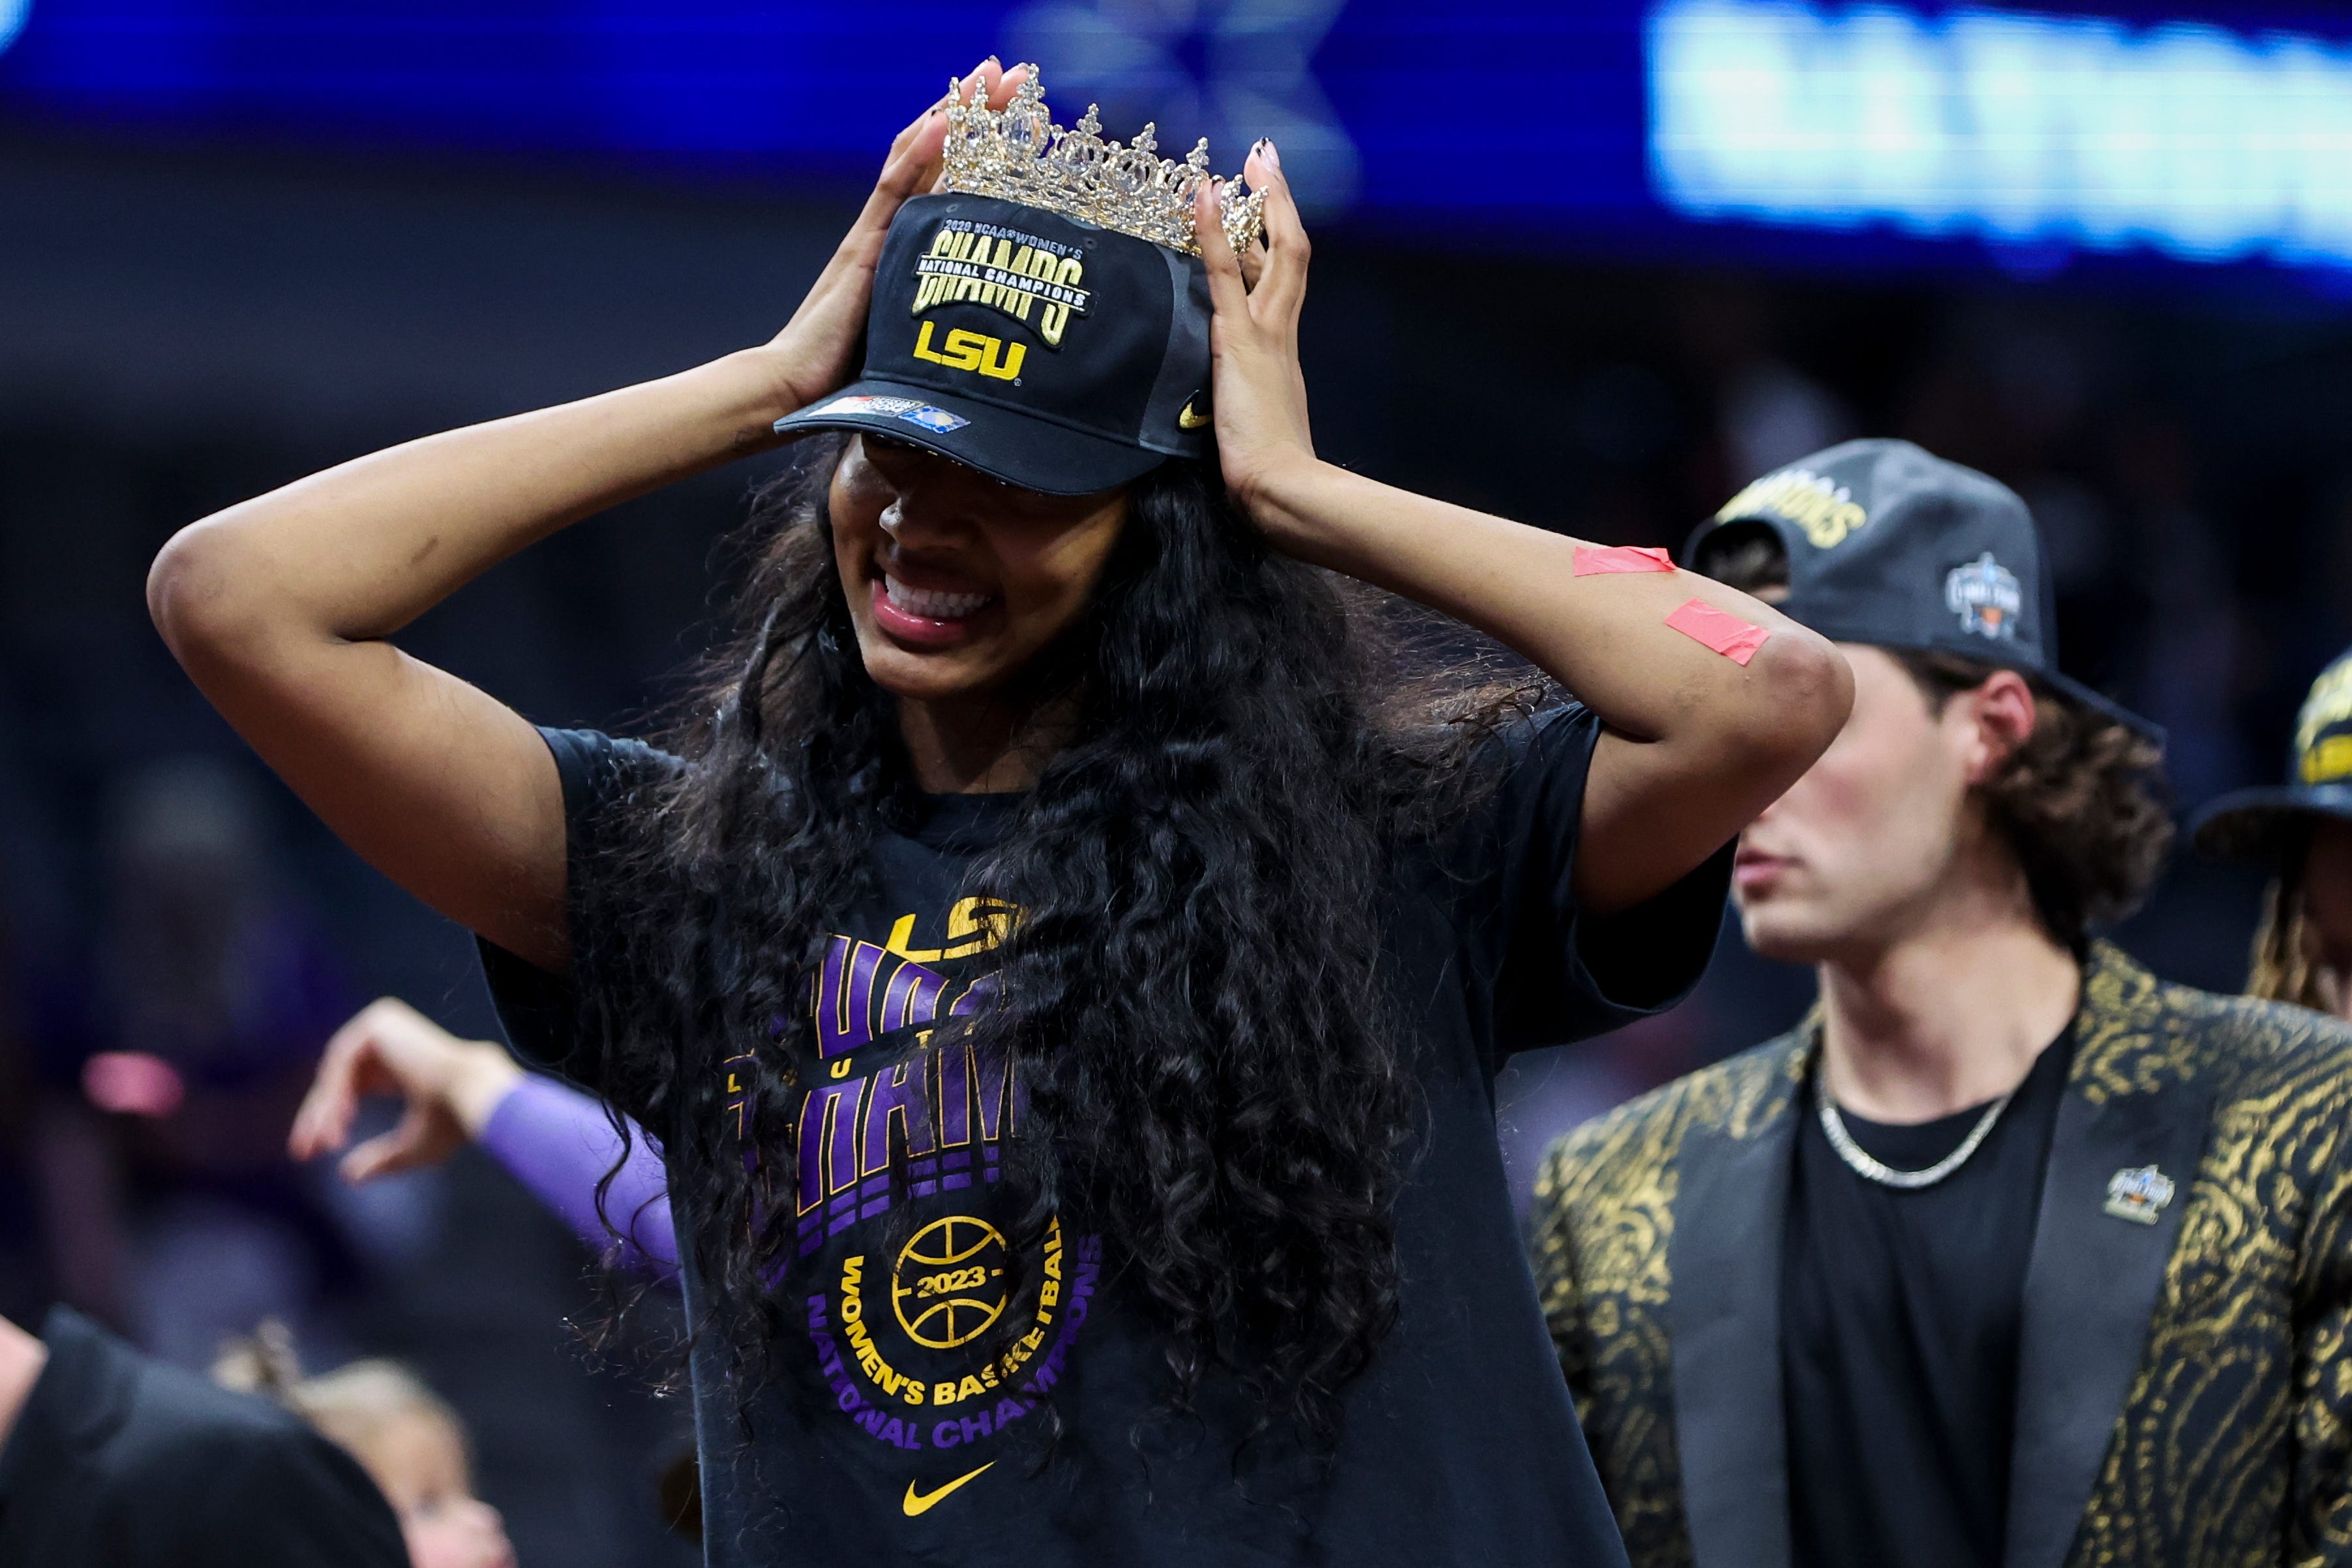 Apr 2, 2023; Dallas, TX, USA; LSU Lady Tigers forward Angel Reese celebrates after defeating the Iowa Hawkeyes during the final round of the Women's Final Four NCAA tournament at the American Airlines Center. Mandatory Credit: Kevin Jairaj-USA TODAY Sports